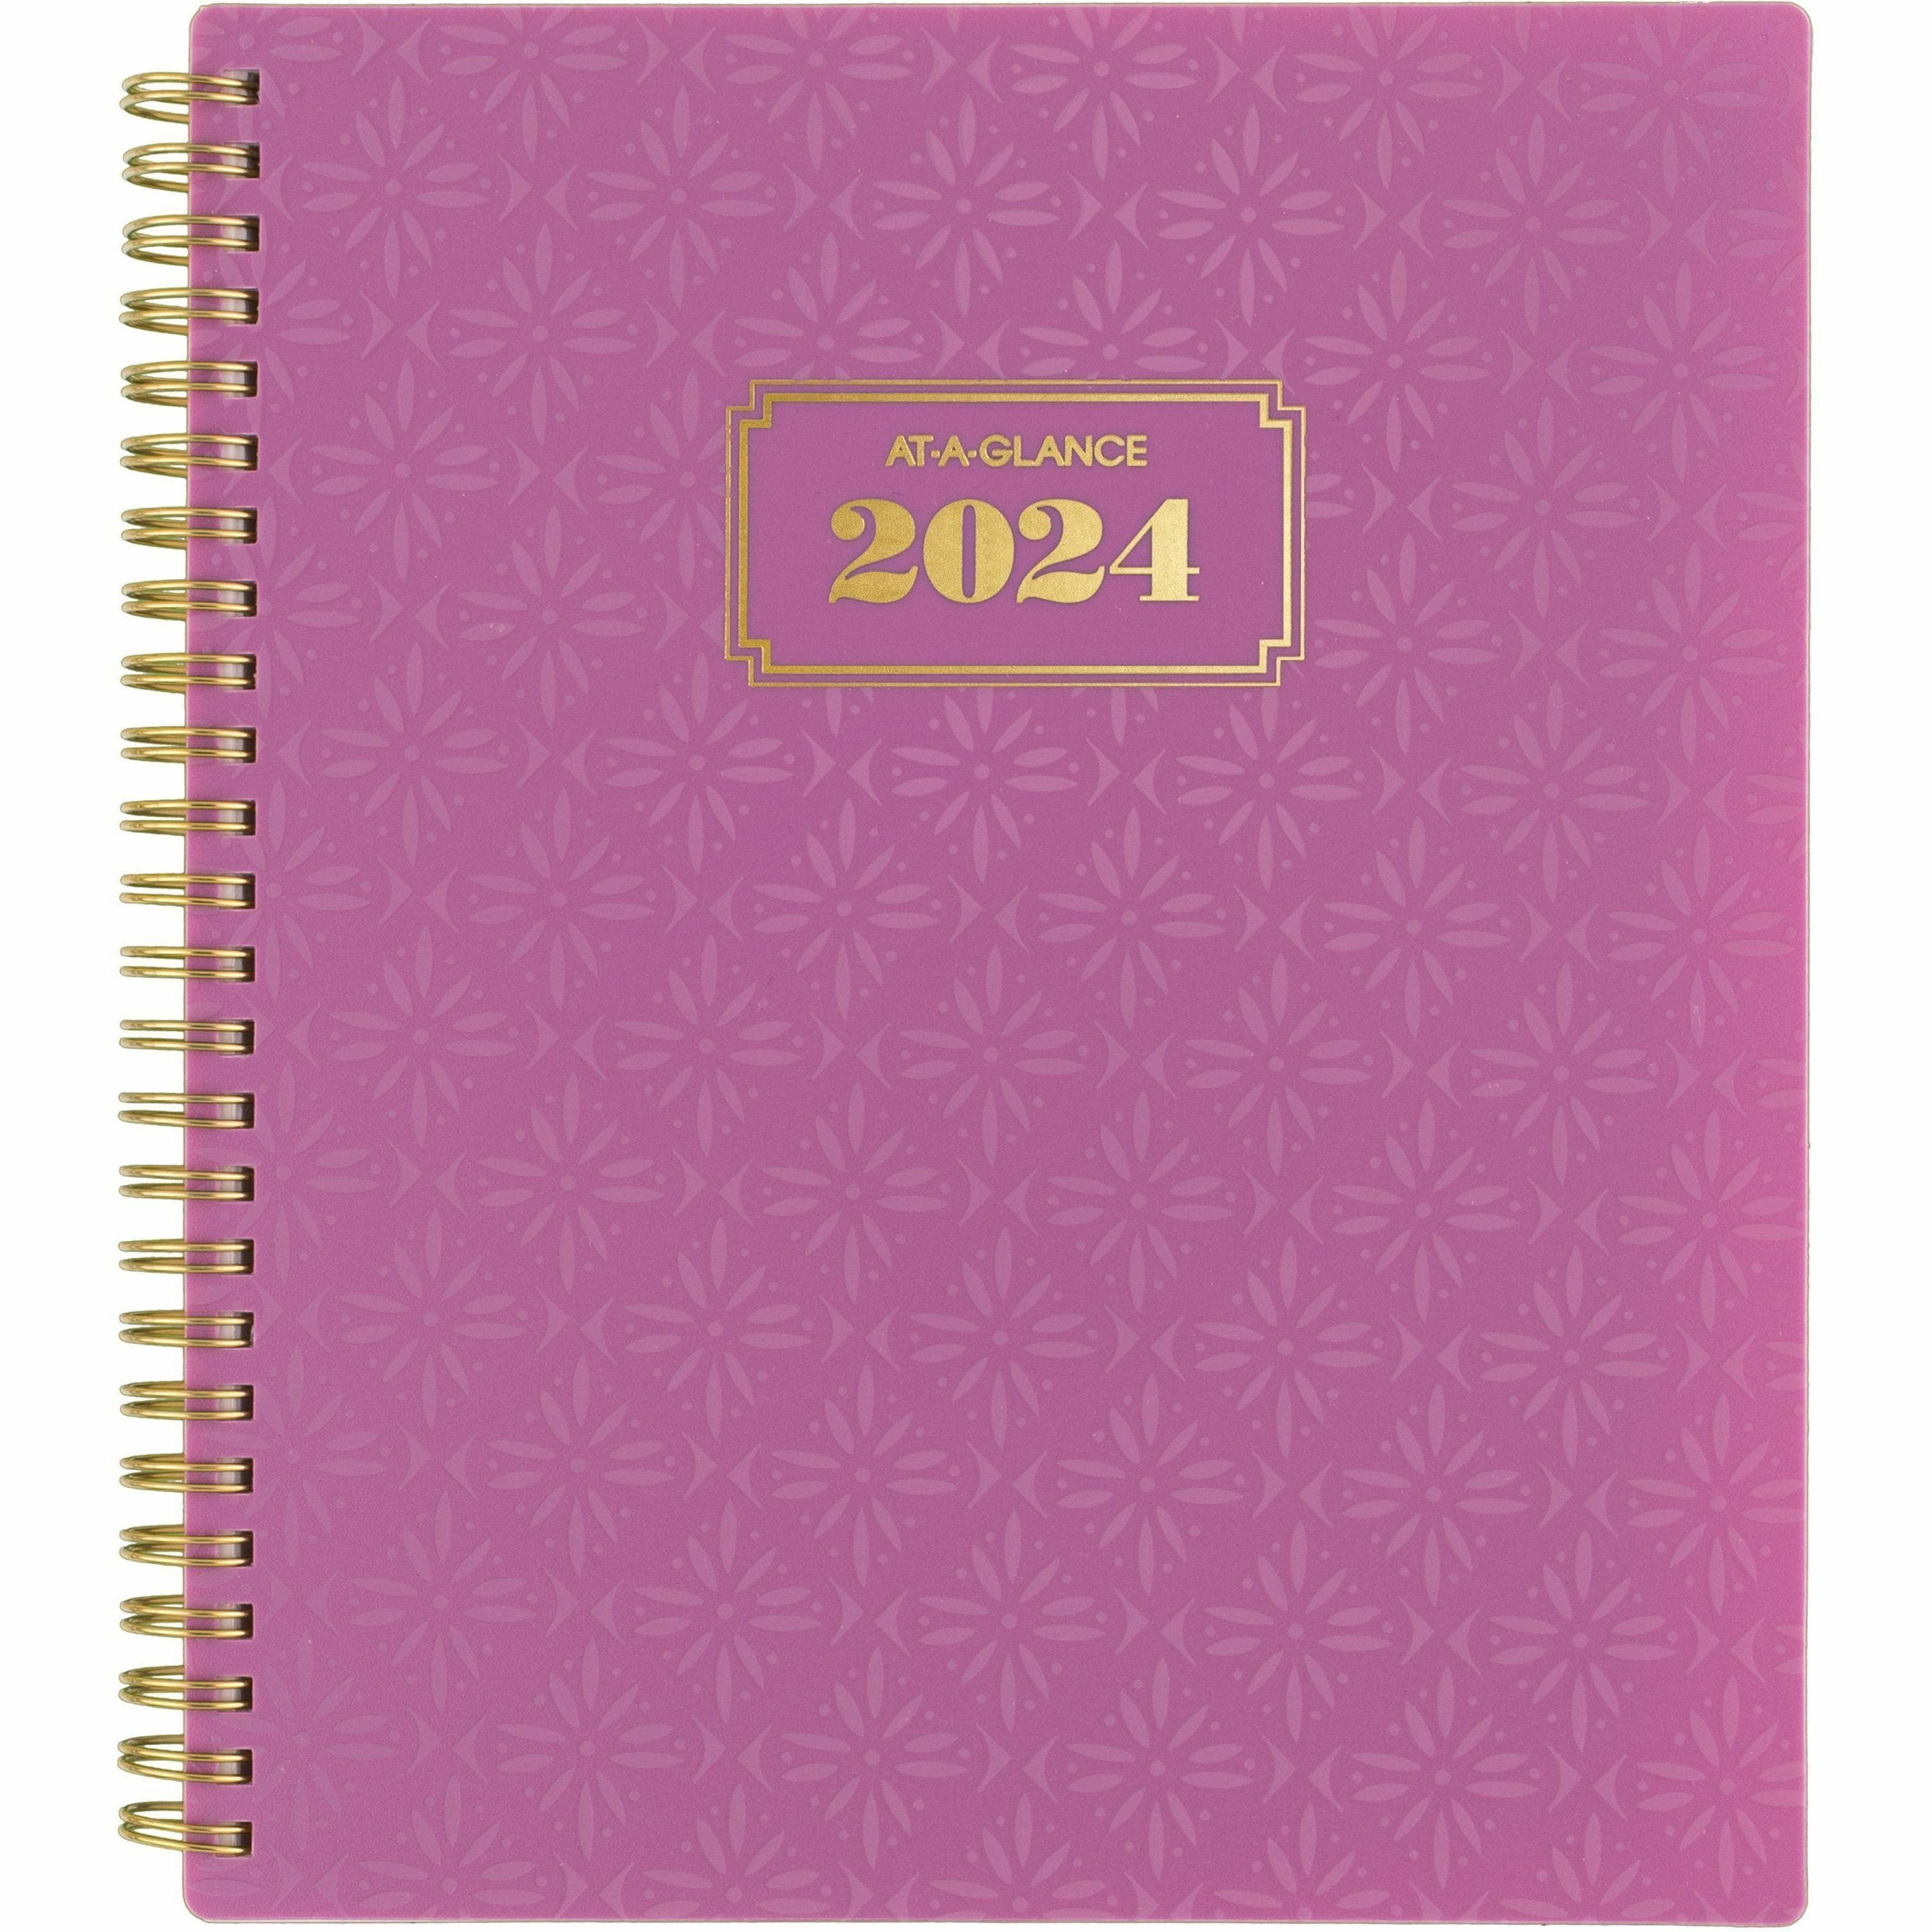 at-a-glance-badge-weekly-monthly-planner-small-size-weekly-monthly-13-month-january-2024-january-2025-7-x-8-3-4-sheet-size-twin-wire-purple-white-paper-bleed-resistant-dated-planning-page-reference-calendar-durable-flexibl_aag1675t805 - 2